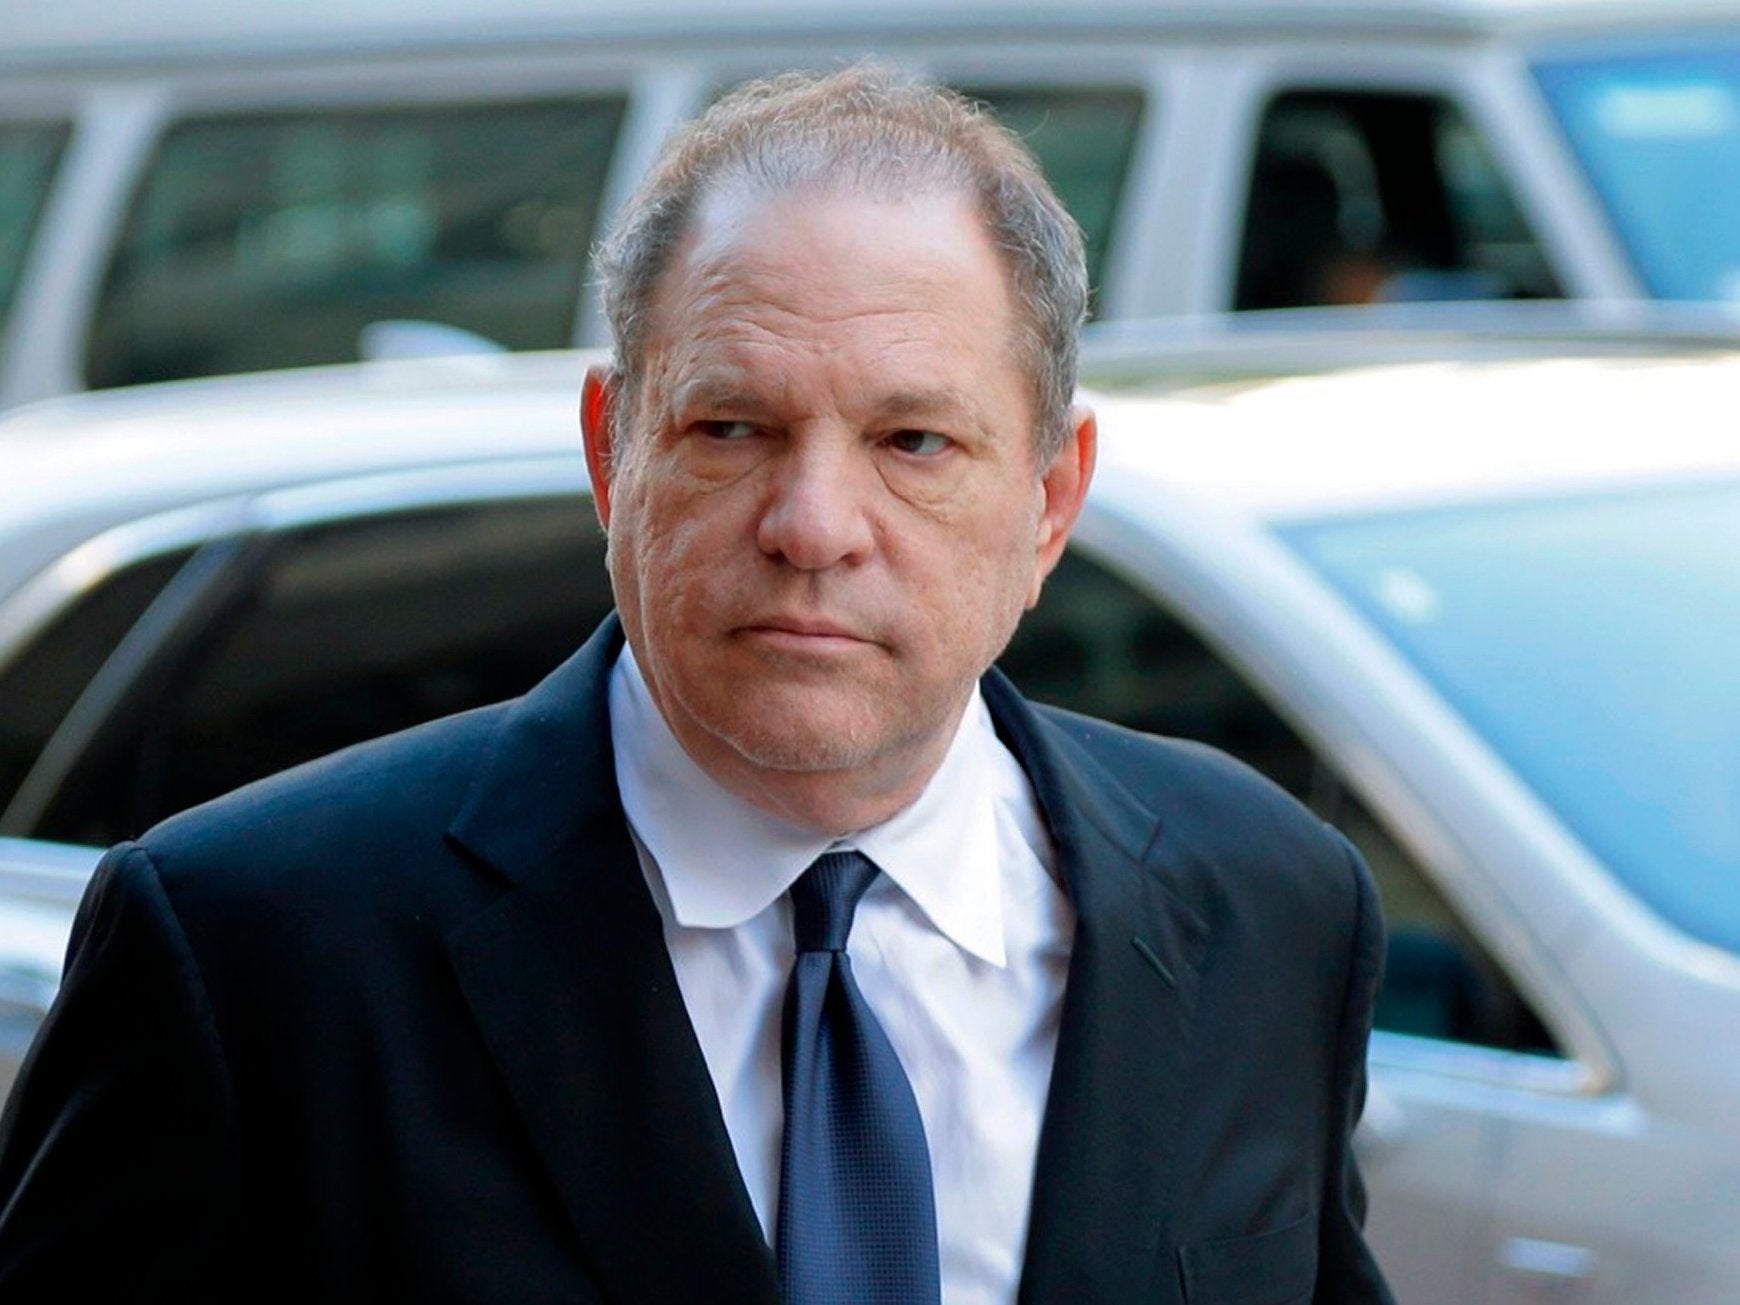 Mr Weinstein is facing an investigation in New York, and he has been told not to leave either New York State or Connecticut